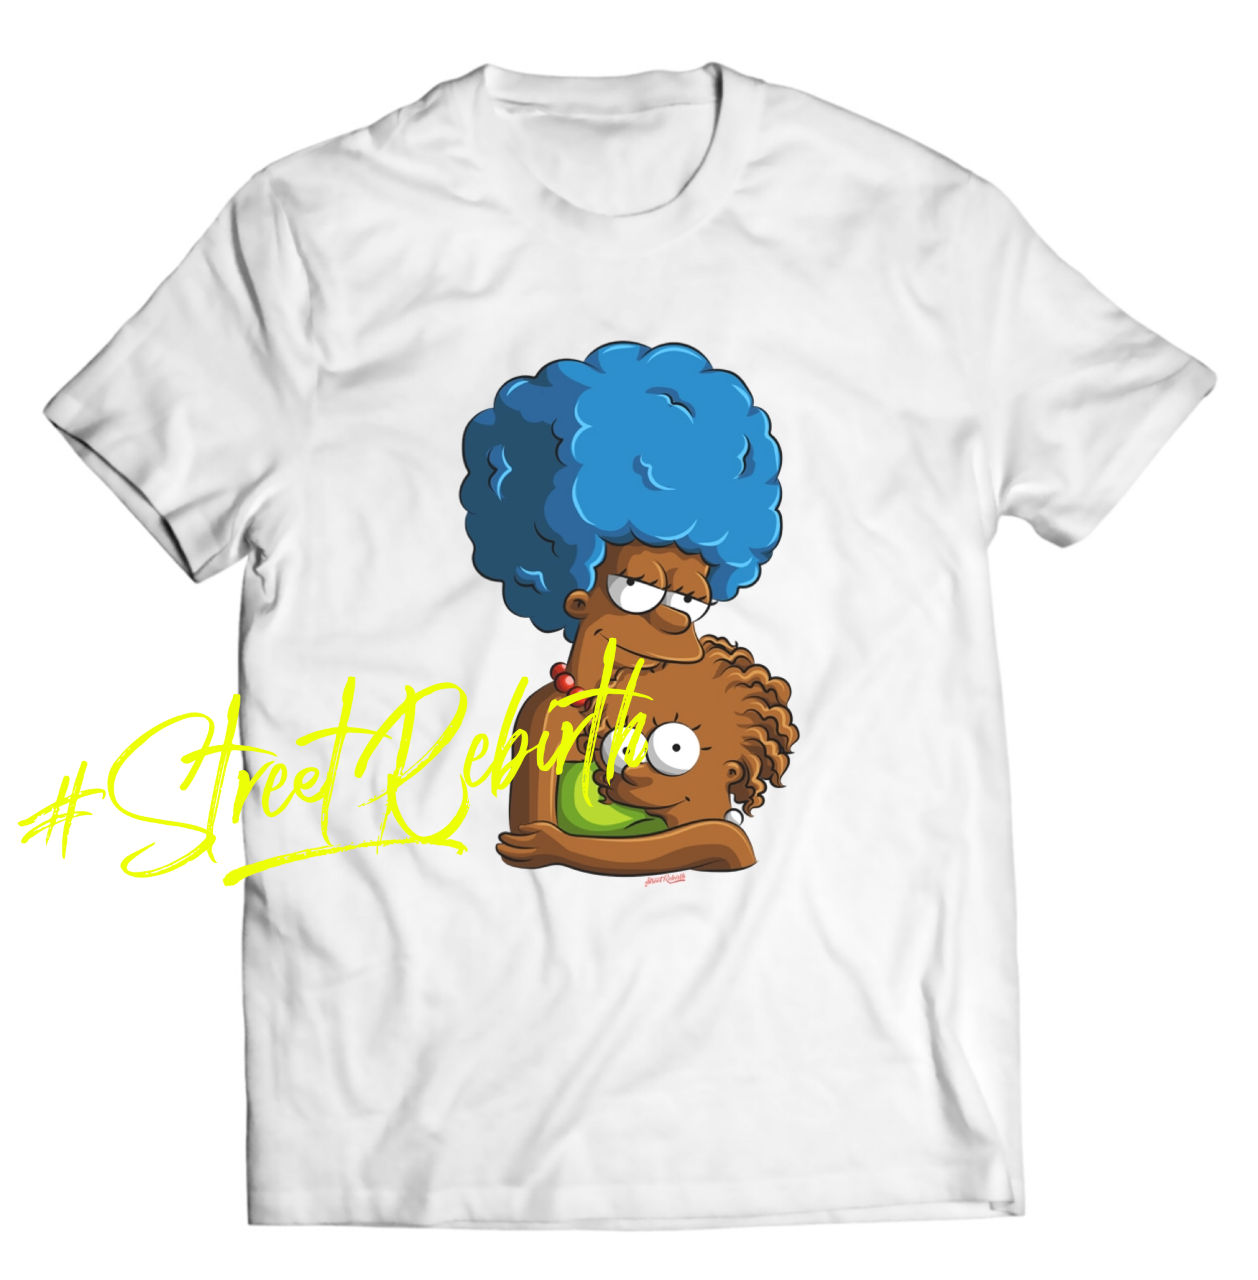 Afro Mashup Shirt - Direct To Garment Quality Print - Unisex Shirt - Gift For Him or Her